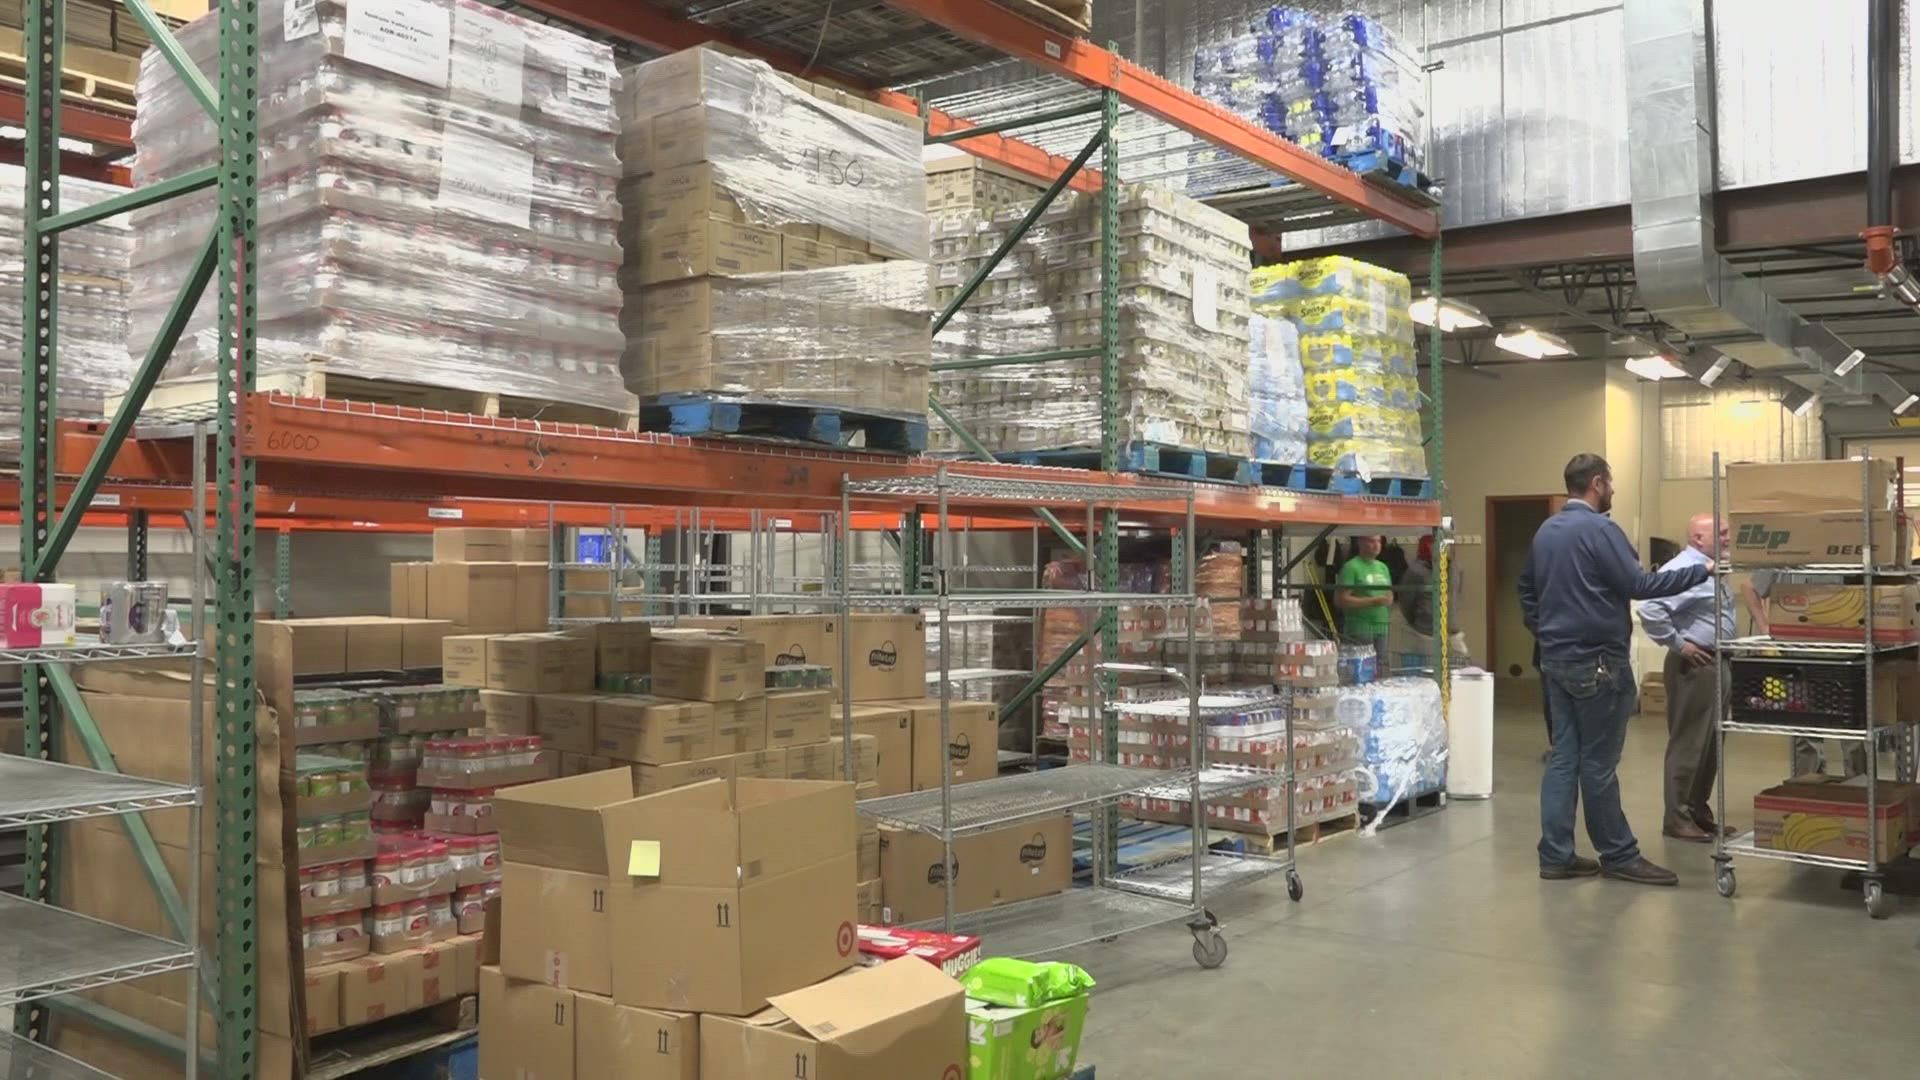 Spokane food bank officials say inflation is causing a supply and demand imbalance.